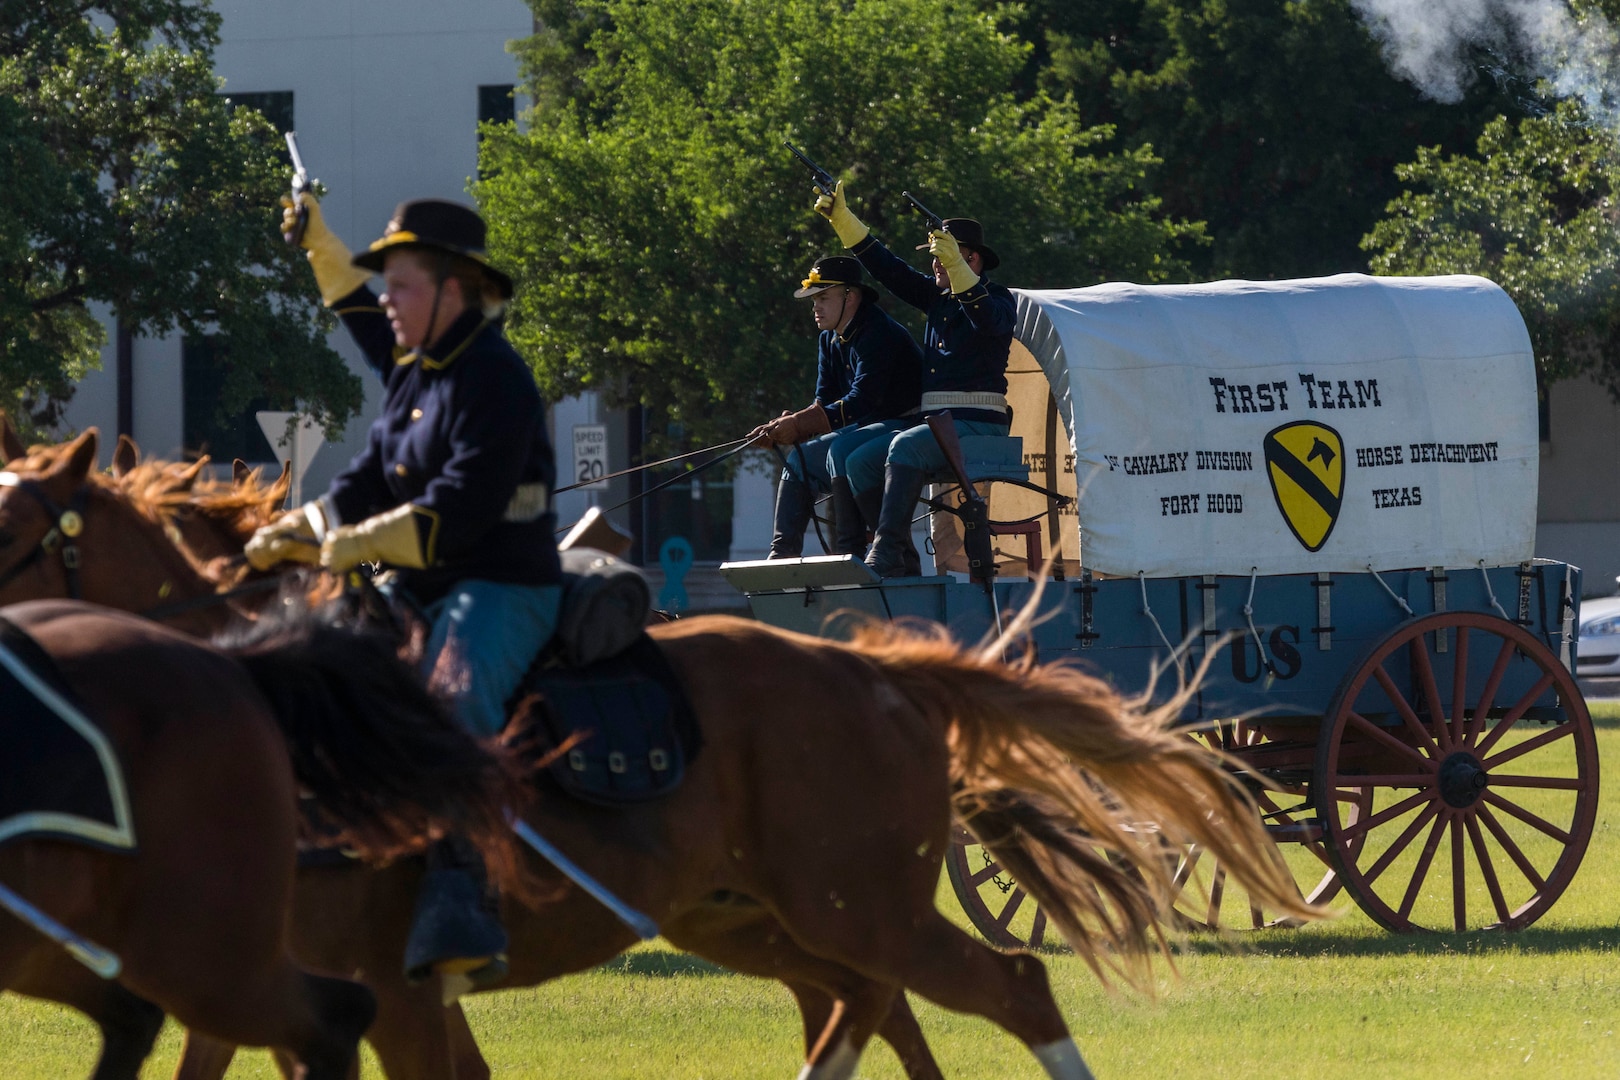 U.S. Army Soldiers with 1st Cavalry Division’s Horse Cavalry Detachment charge across the field during the annual Military Appreciation Weekend May 6, 2017 at Joint Base San Antonio-Fort Sam Houston, Texas. U.S. Army North and JBSA hosted the two-day event, which featured music, family activities, and various military demonstrations. This year, the appreciation weekend also commemorated the 300th anniversary for the city of San Antonio. (U.S. Air Force photo by Ismael Ortega / Released)